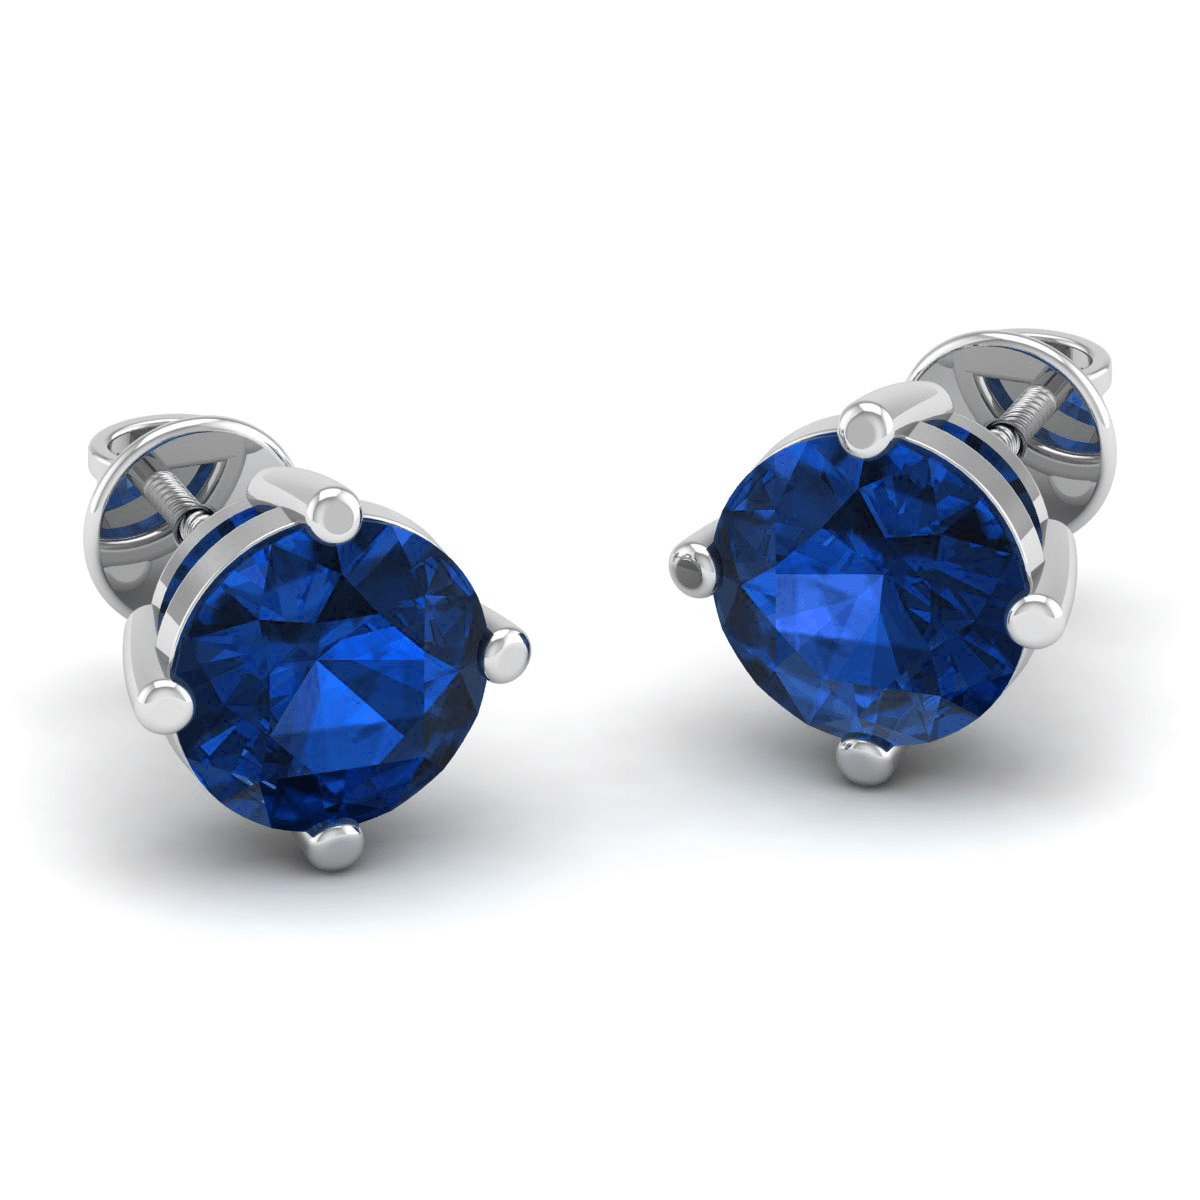 Akshat Sapphire Sterling Silver (92.5% purity) Precious Stud Earrings for Girls and Women Pure Silver Beautiful and Designer studs earring with cubic zirconia (AD) stones (4mm × 4mm)